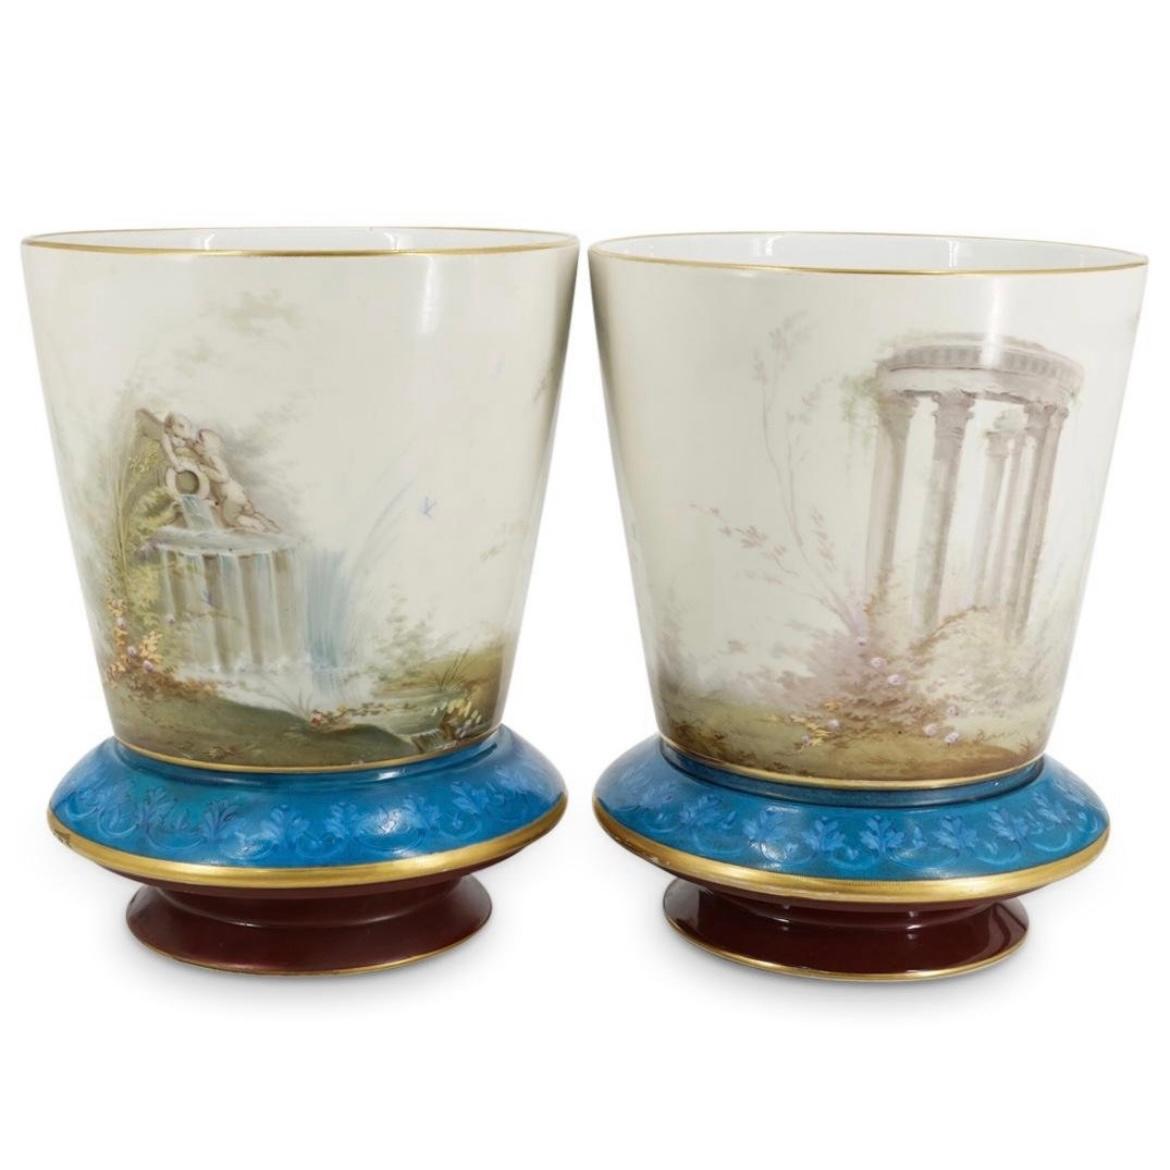 Our exceptionally rare pair of opaline jardinieres attributed to Baccarat are distinguished by their extensive enameling and finely painted neoclassical designs including maidens with cupid, putti at a fountain and Roman ruins, plus finely painted